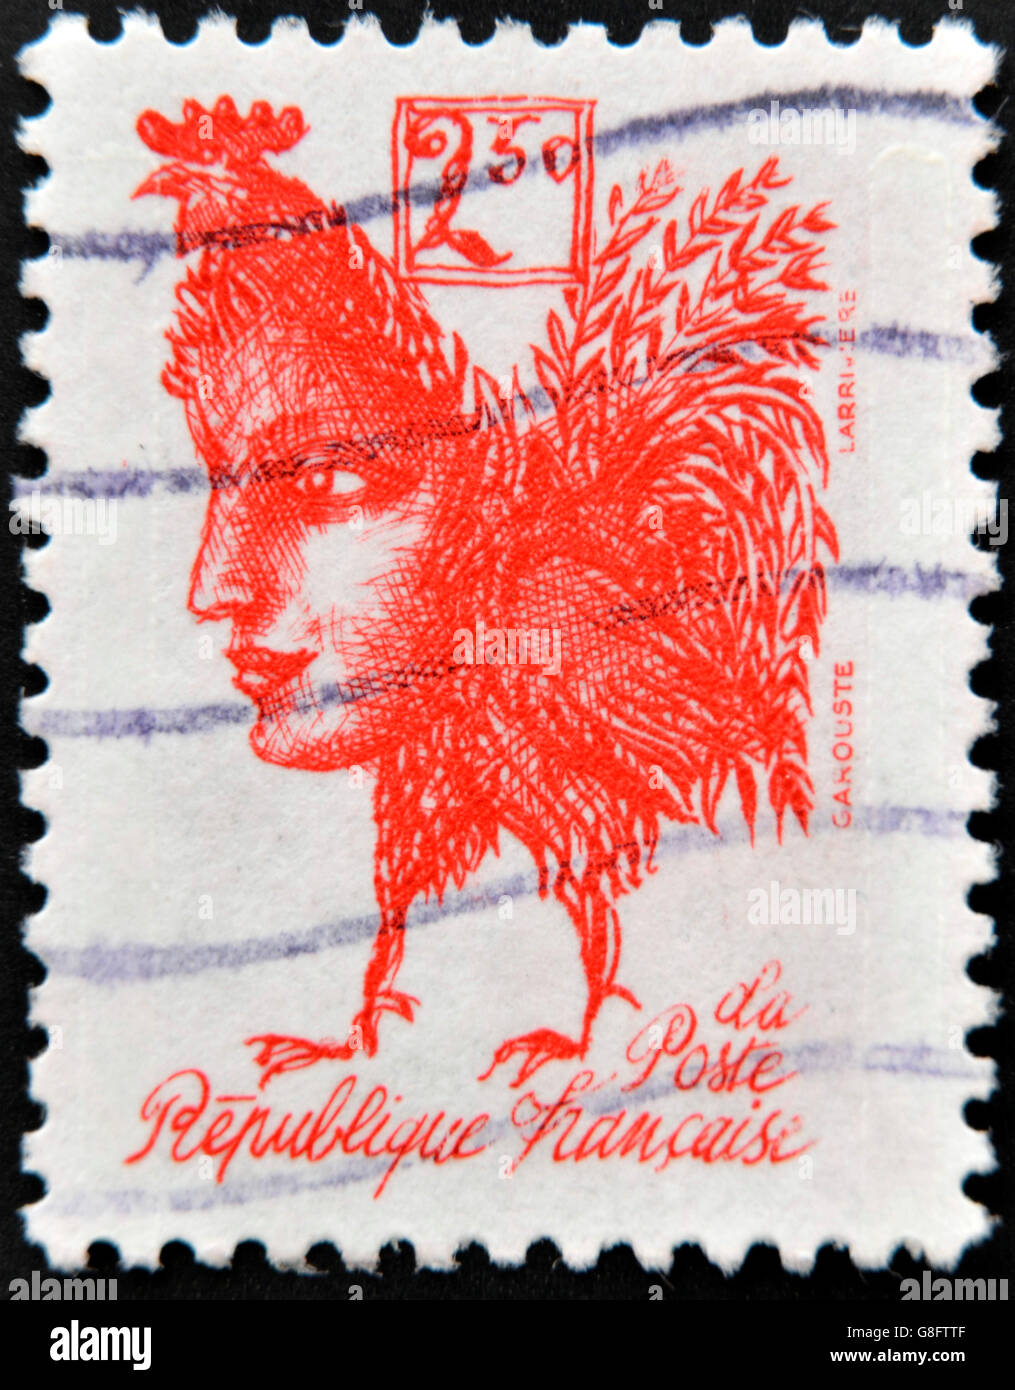 FRANCE - CIRCA 1992: A stamp printed in France commemorating the bicentennial of the French Republic, shows a gallic rooster wit Stock Photo